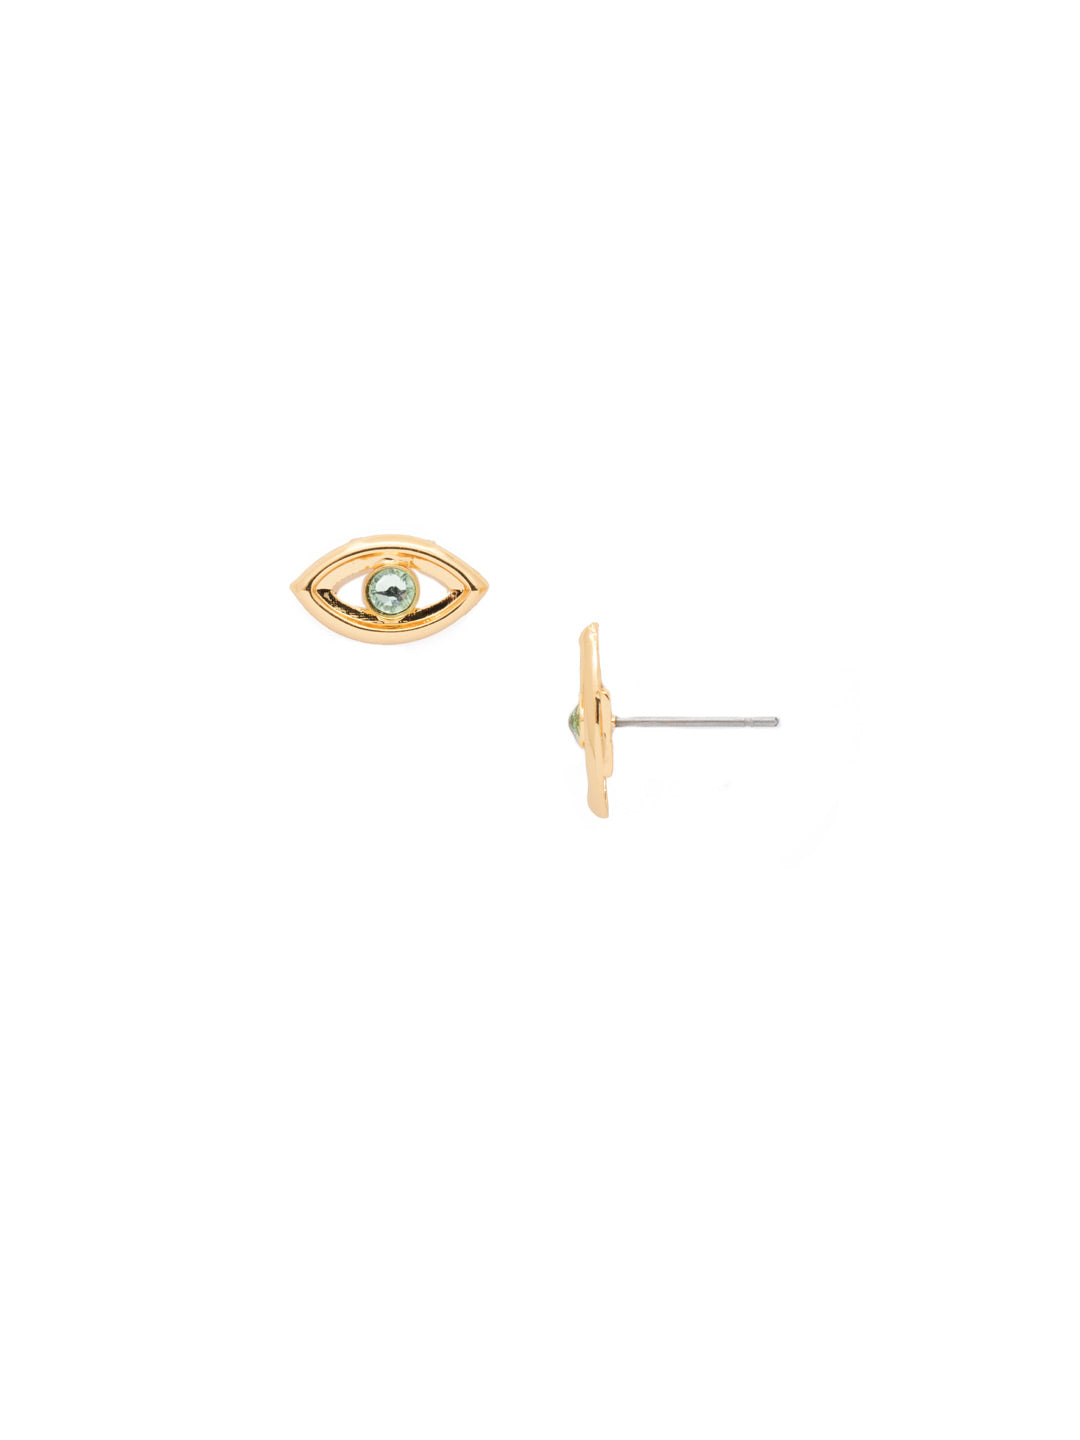 Evil Eye Stud Earring - EEV66BGSPR - <p>Our Evil Eye Stud Earrings are simple must-haves for lovers of the symbol. Just fasten them on and go. They're great pieces to add to a casual wear day. From Sorrelli's Spring Rain collection in our Bright Gold-tone finish.</p>